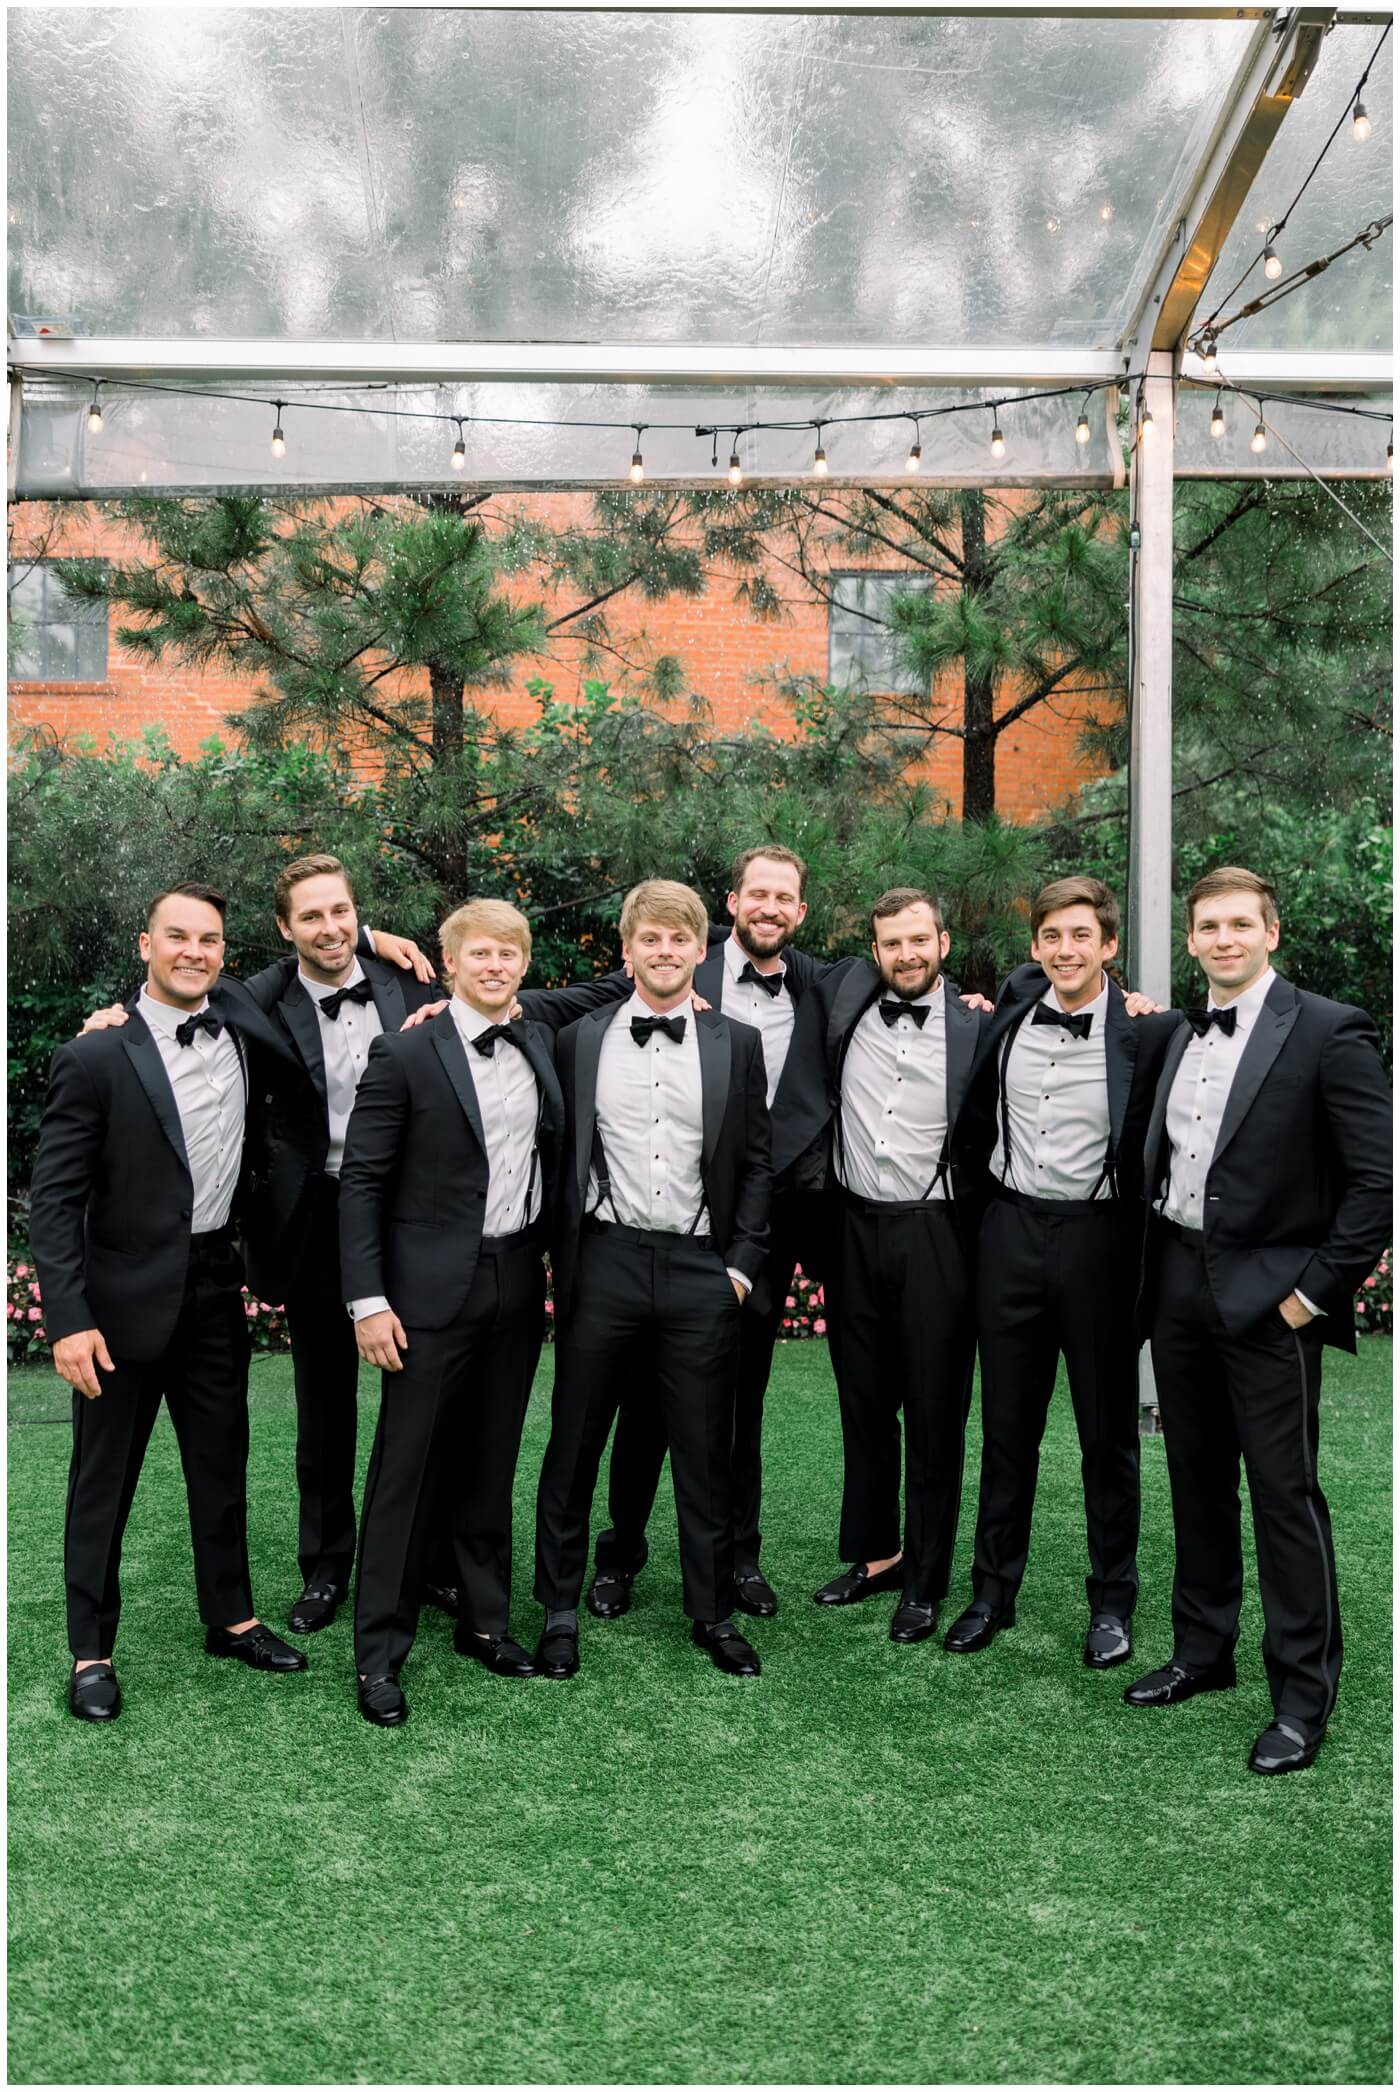 The Groom smiles with his groomsmen on his wedding day